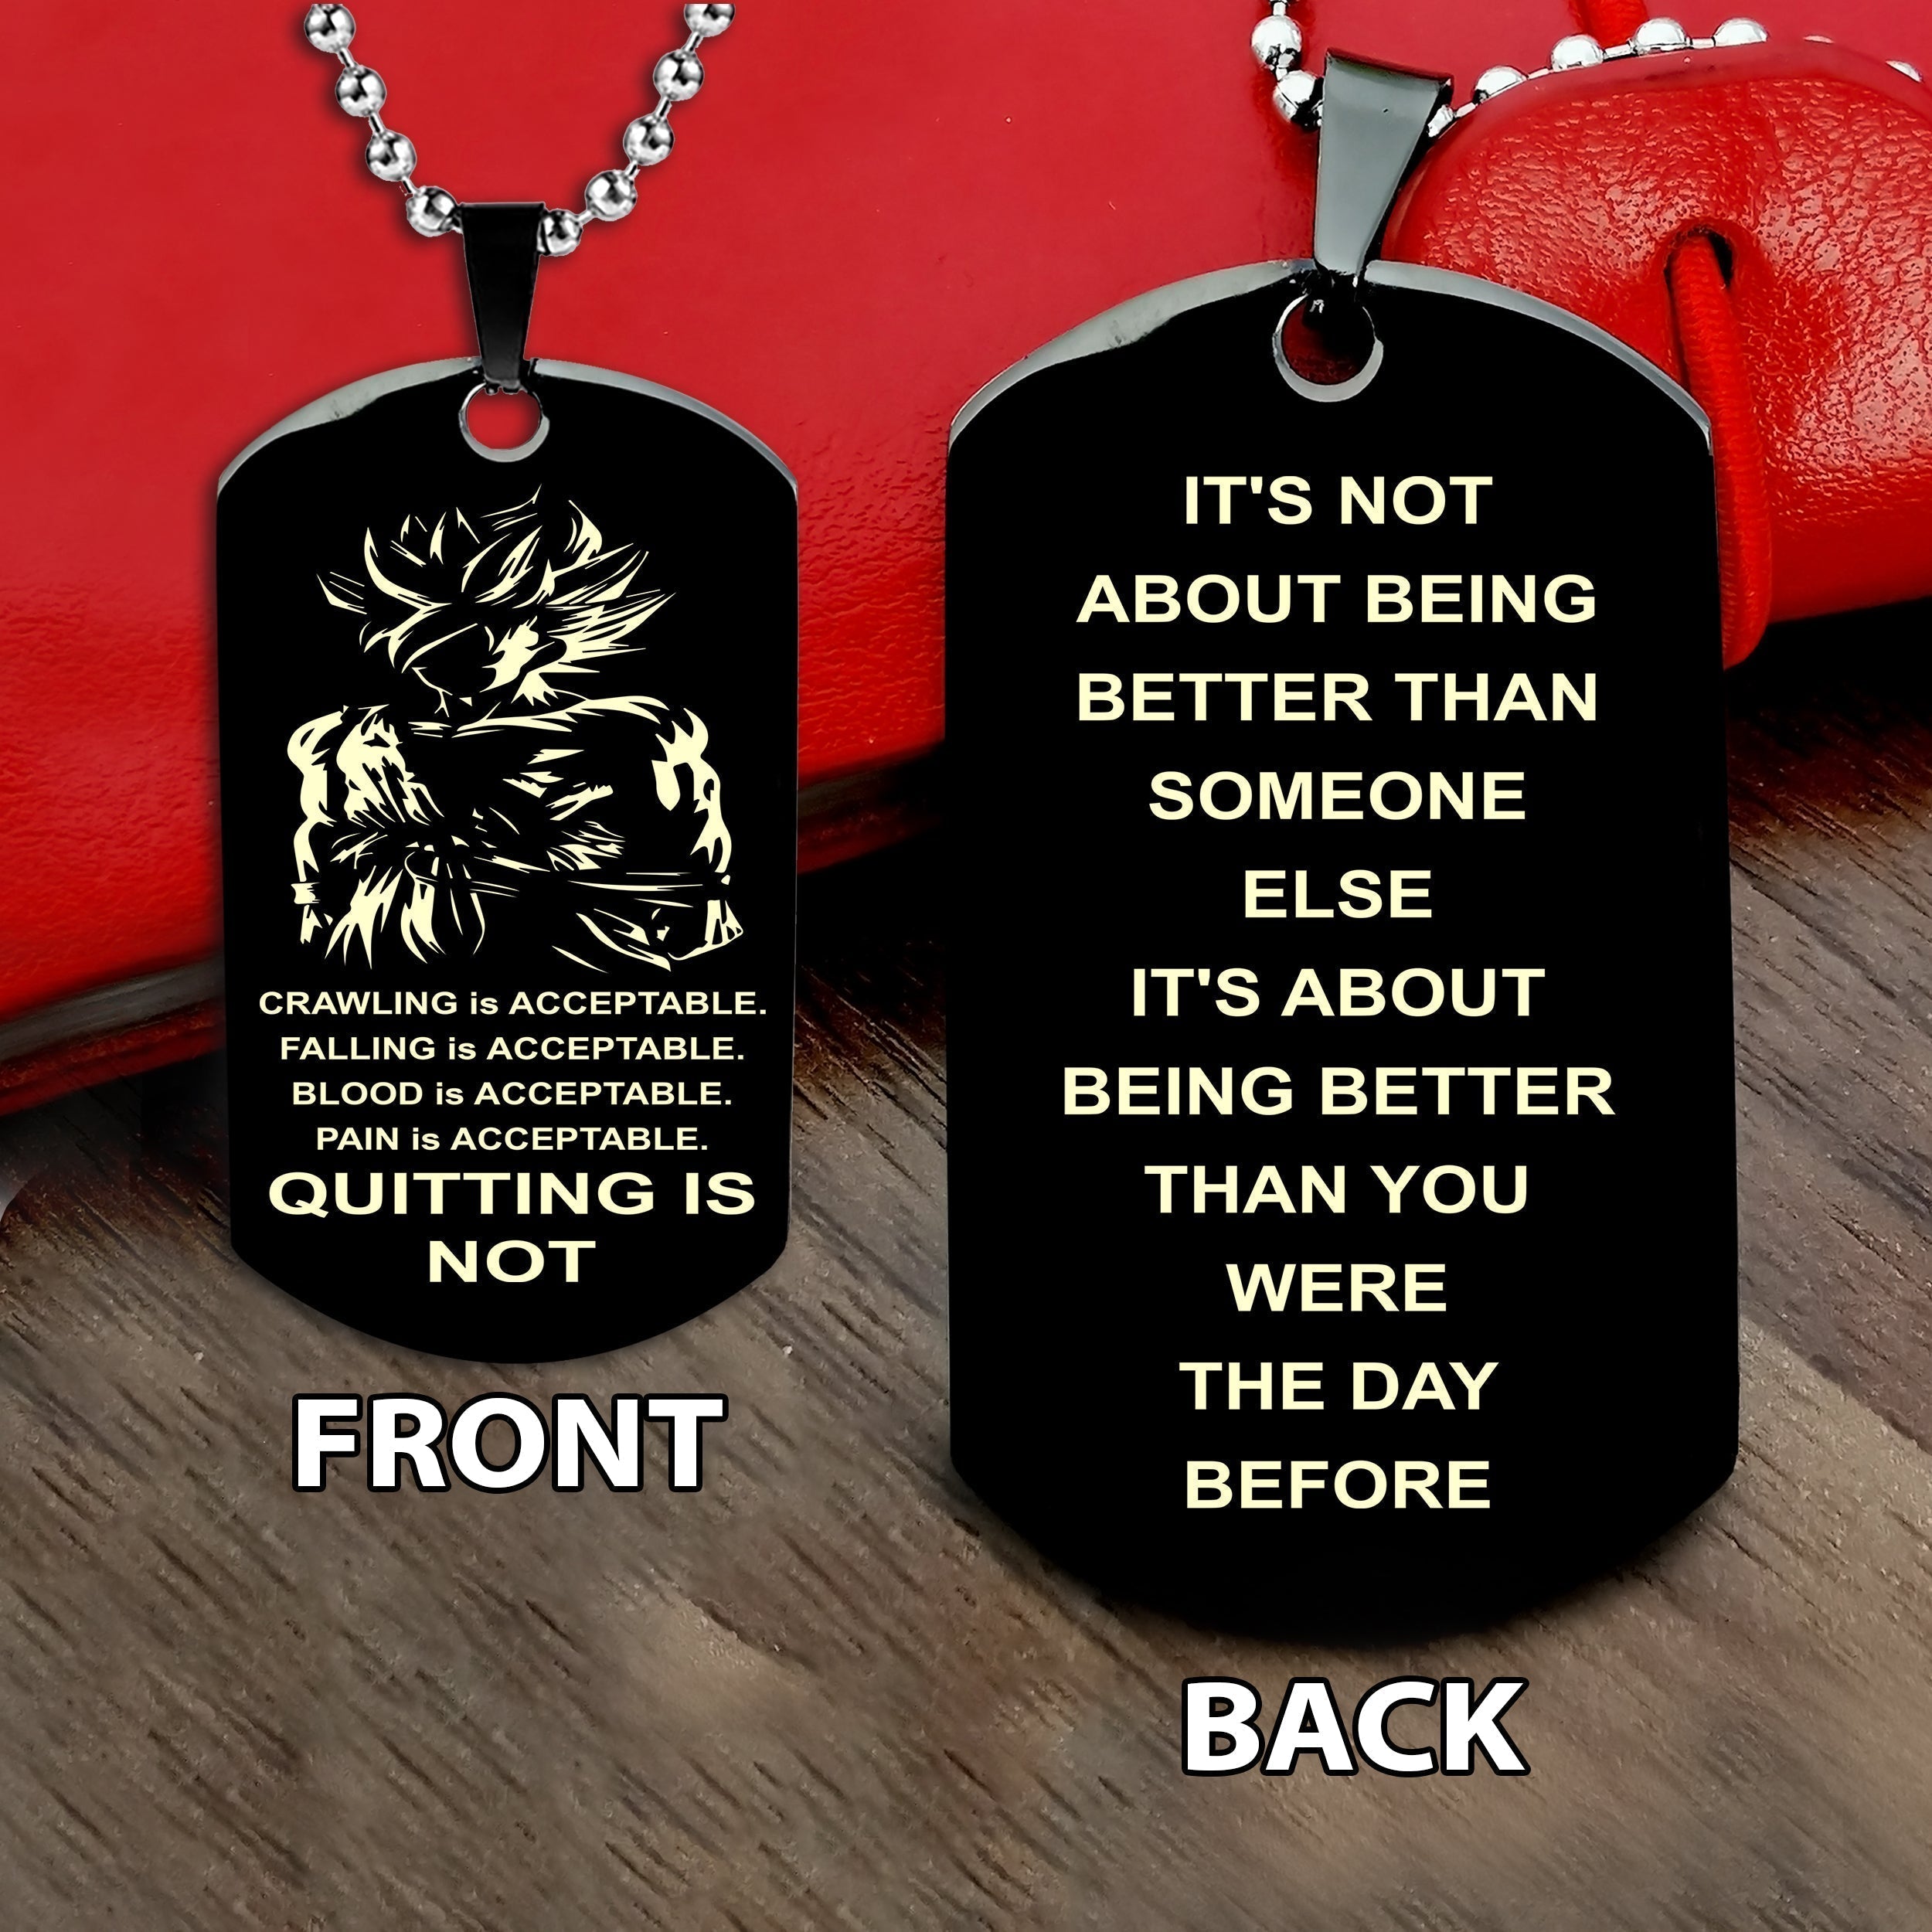 Quitting is not double side dog tag bracelet, It is not about better than someone else, It is about being better than you were the day before